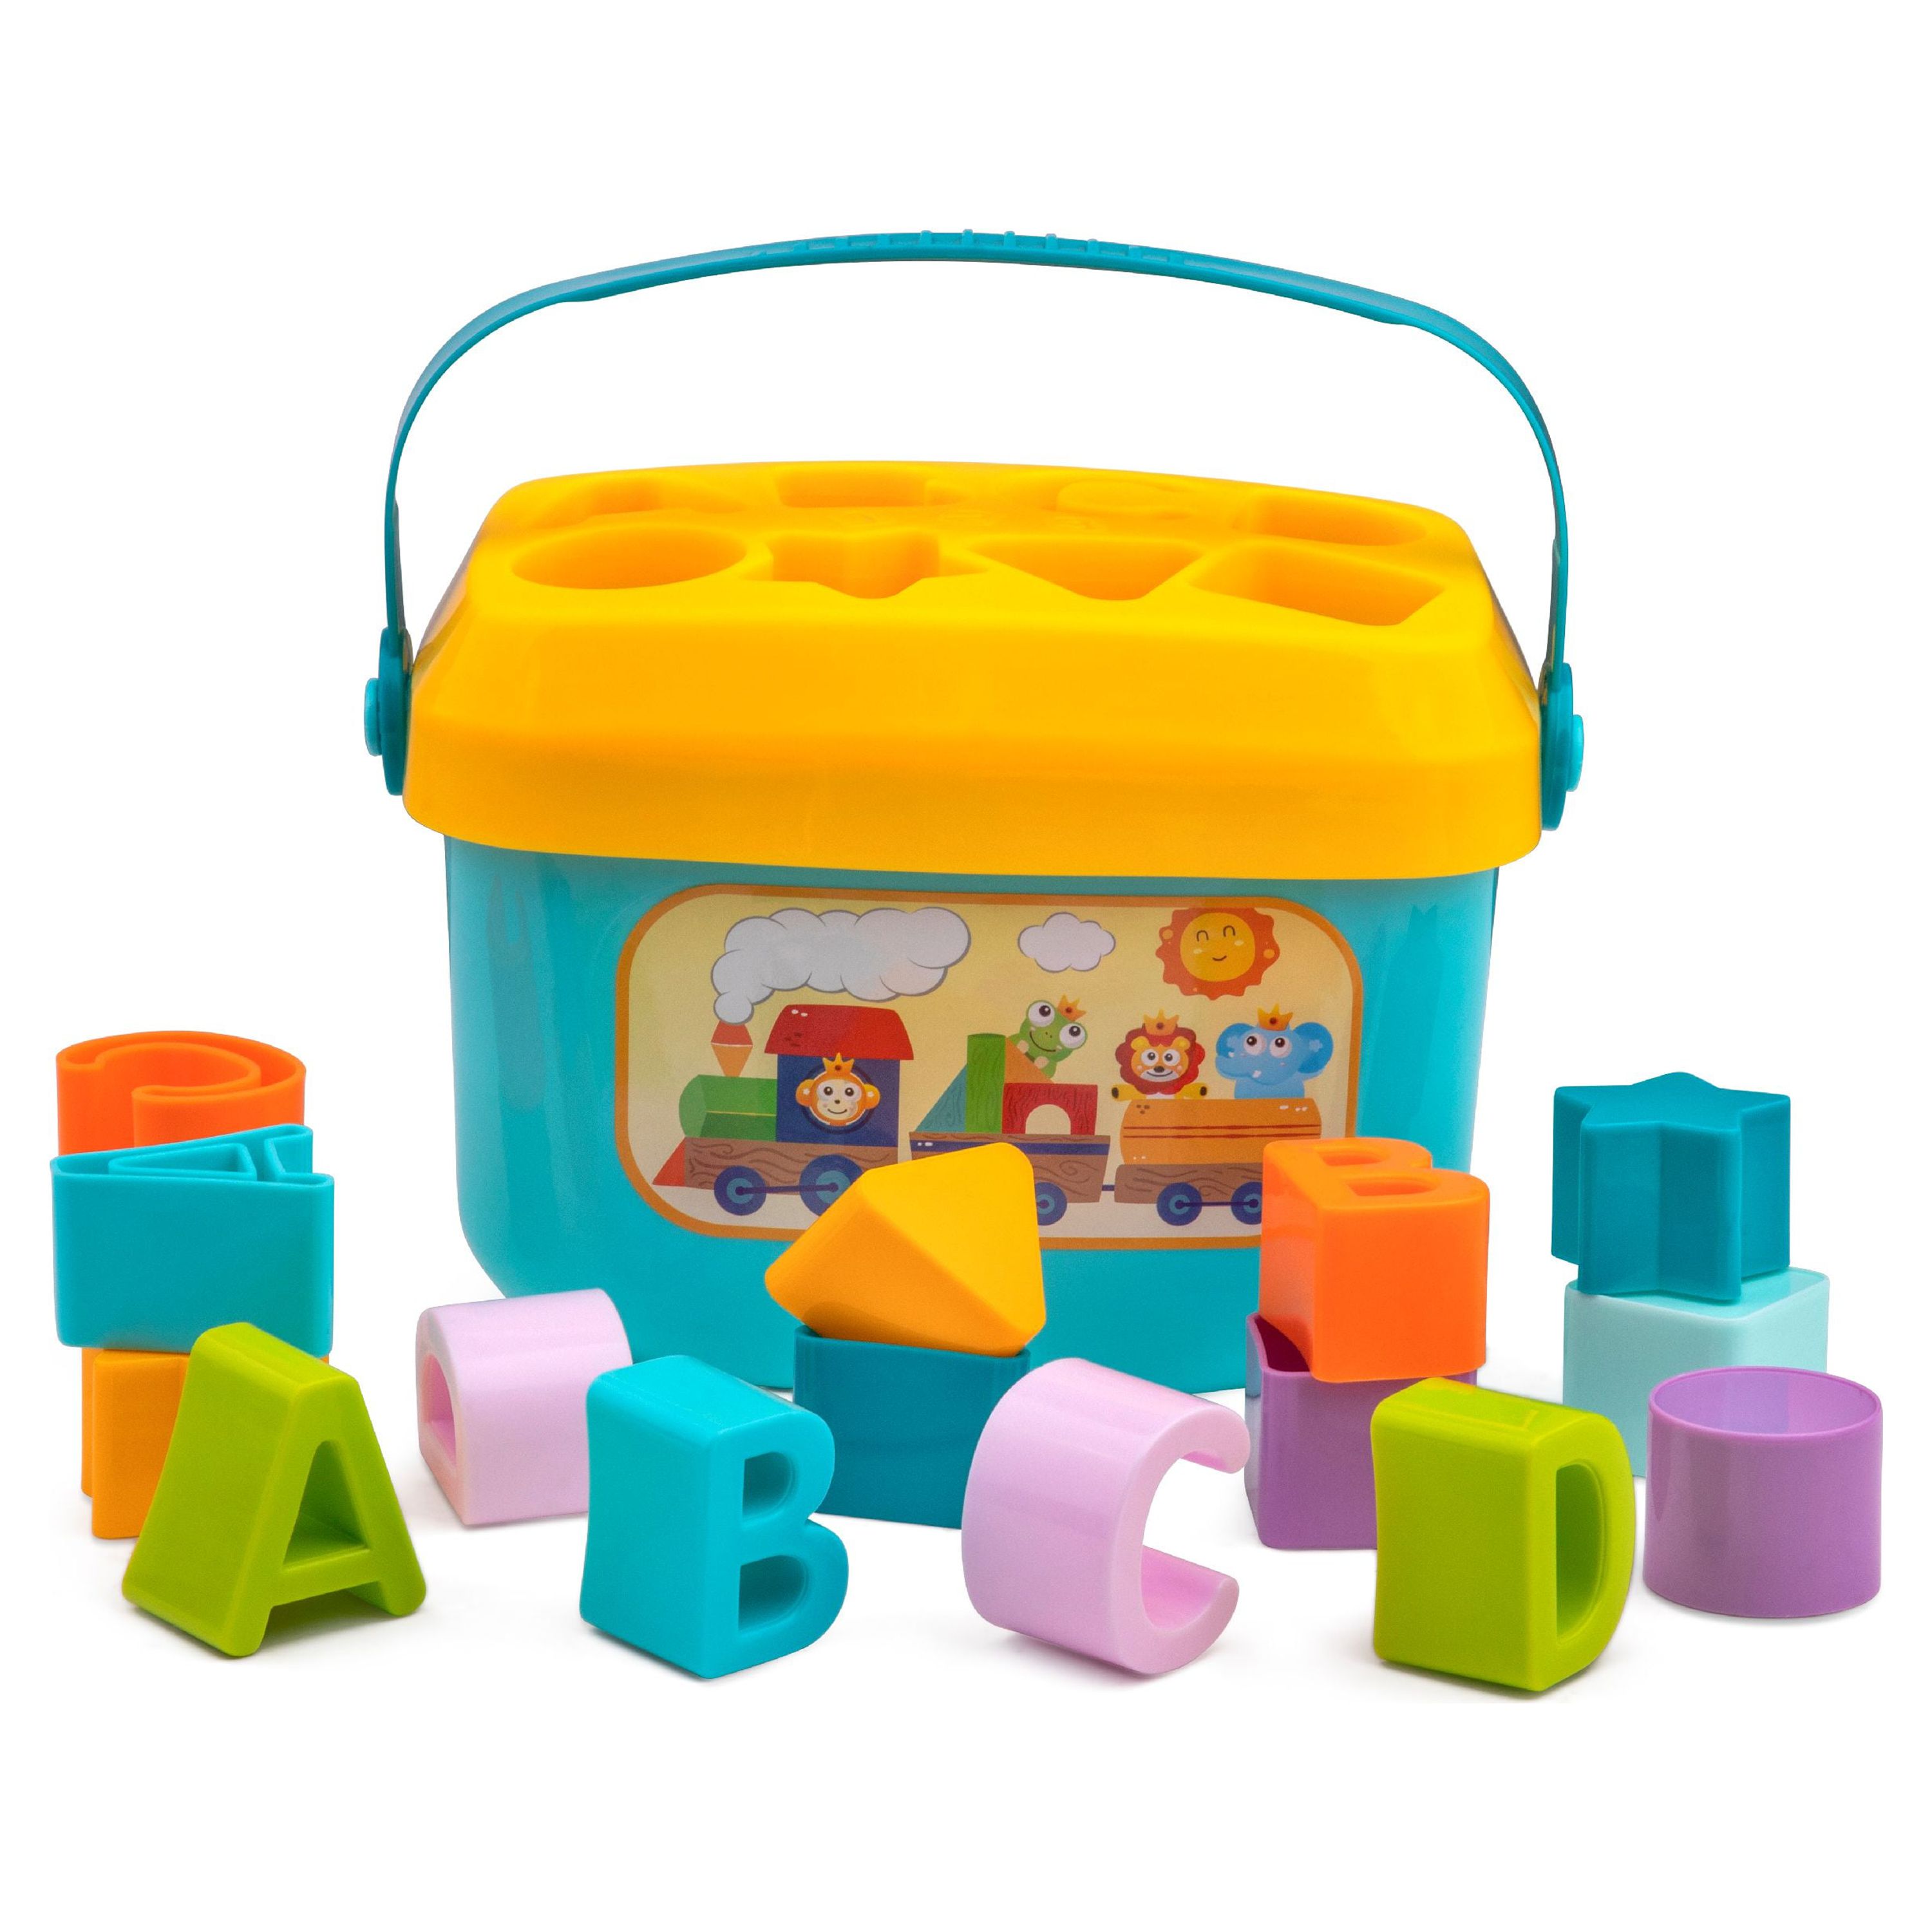 Playkidz Shape Sorter Baby and Toddler Toy, ABC and Shape Pieces, Sorting Shape Game, Developmental Toy for Children 18 months+ - image 1 of 7